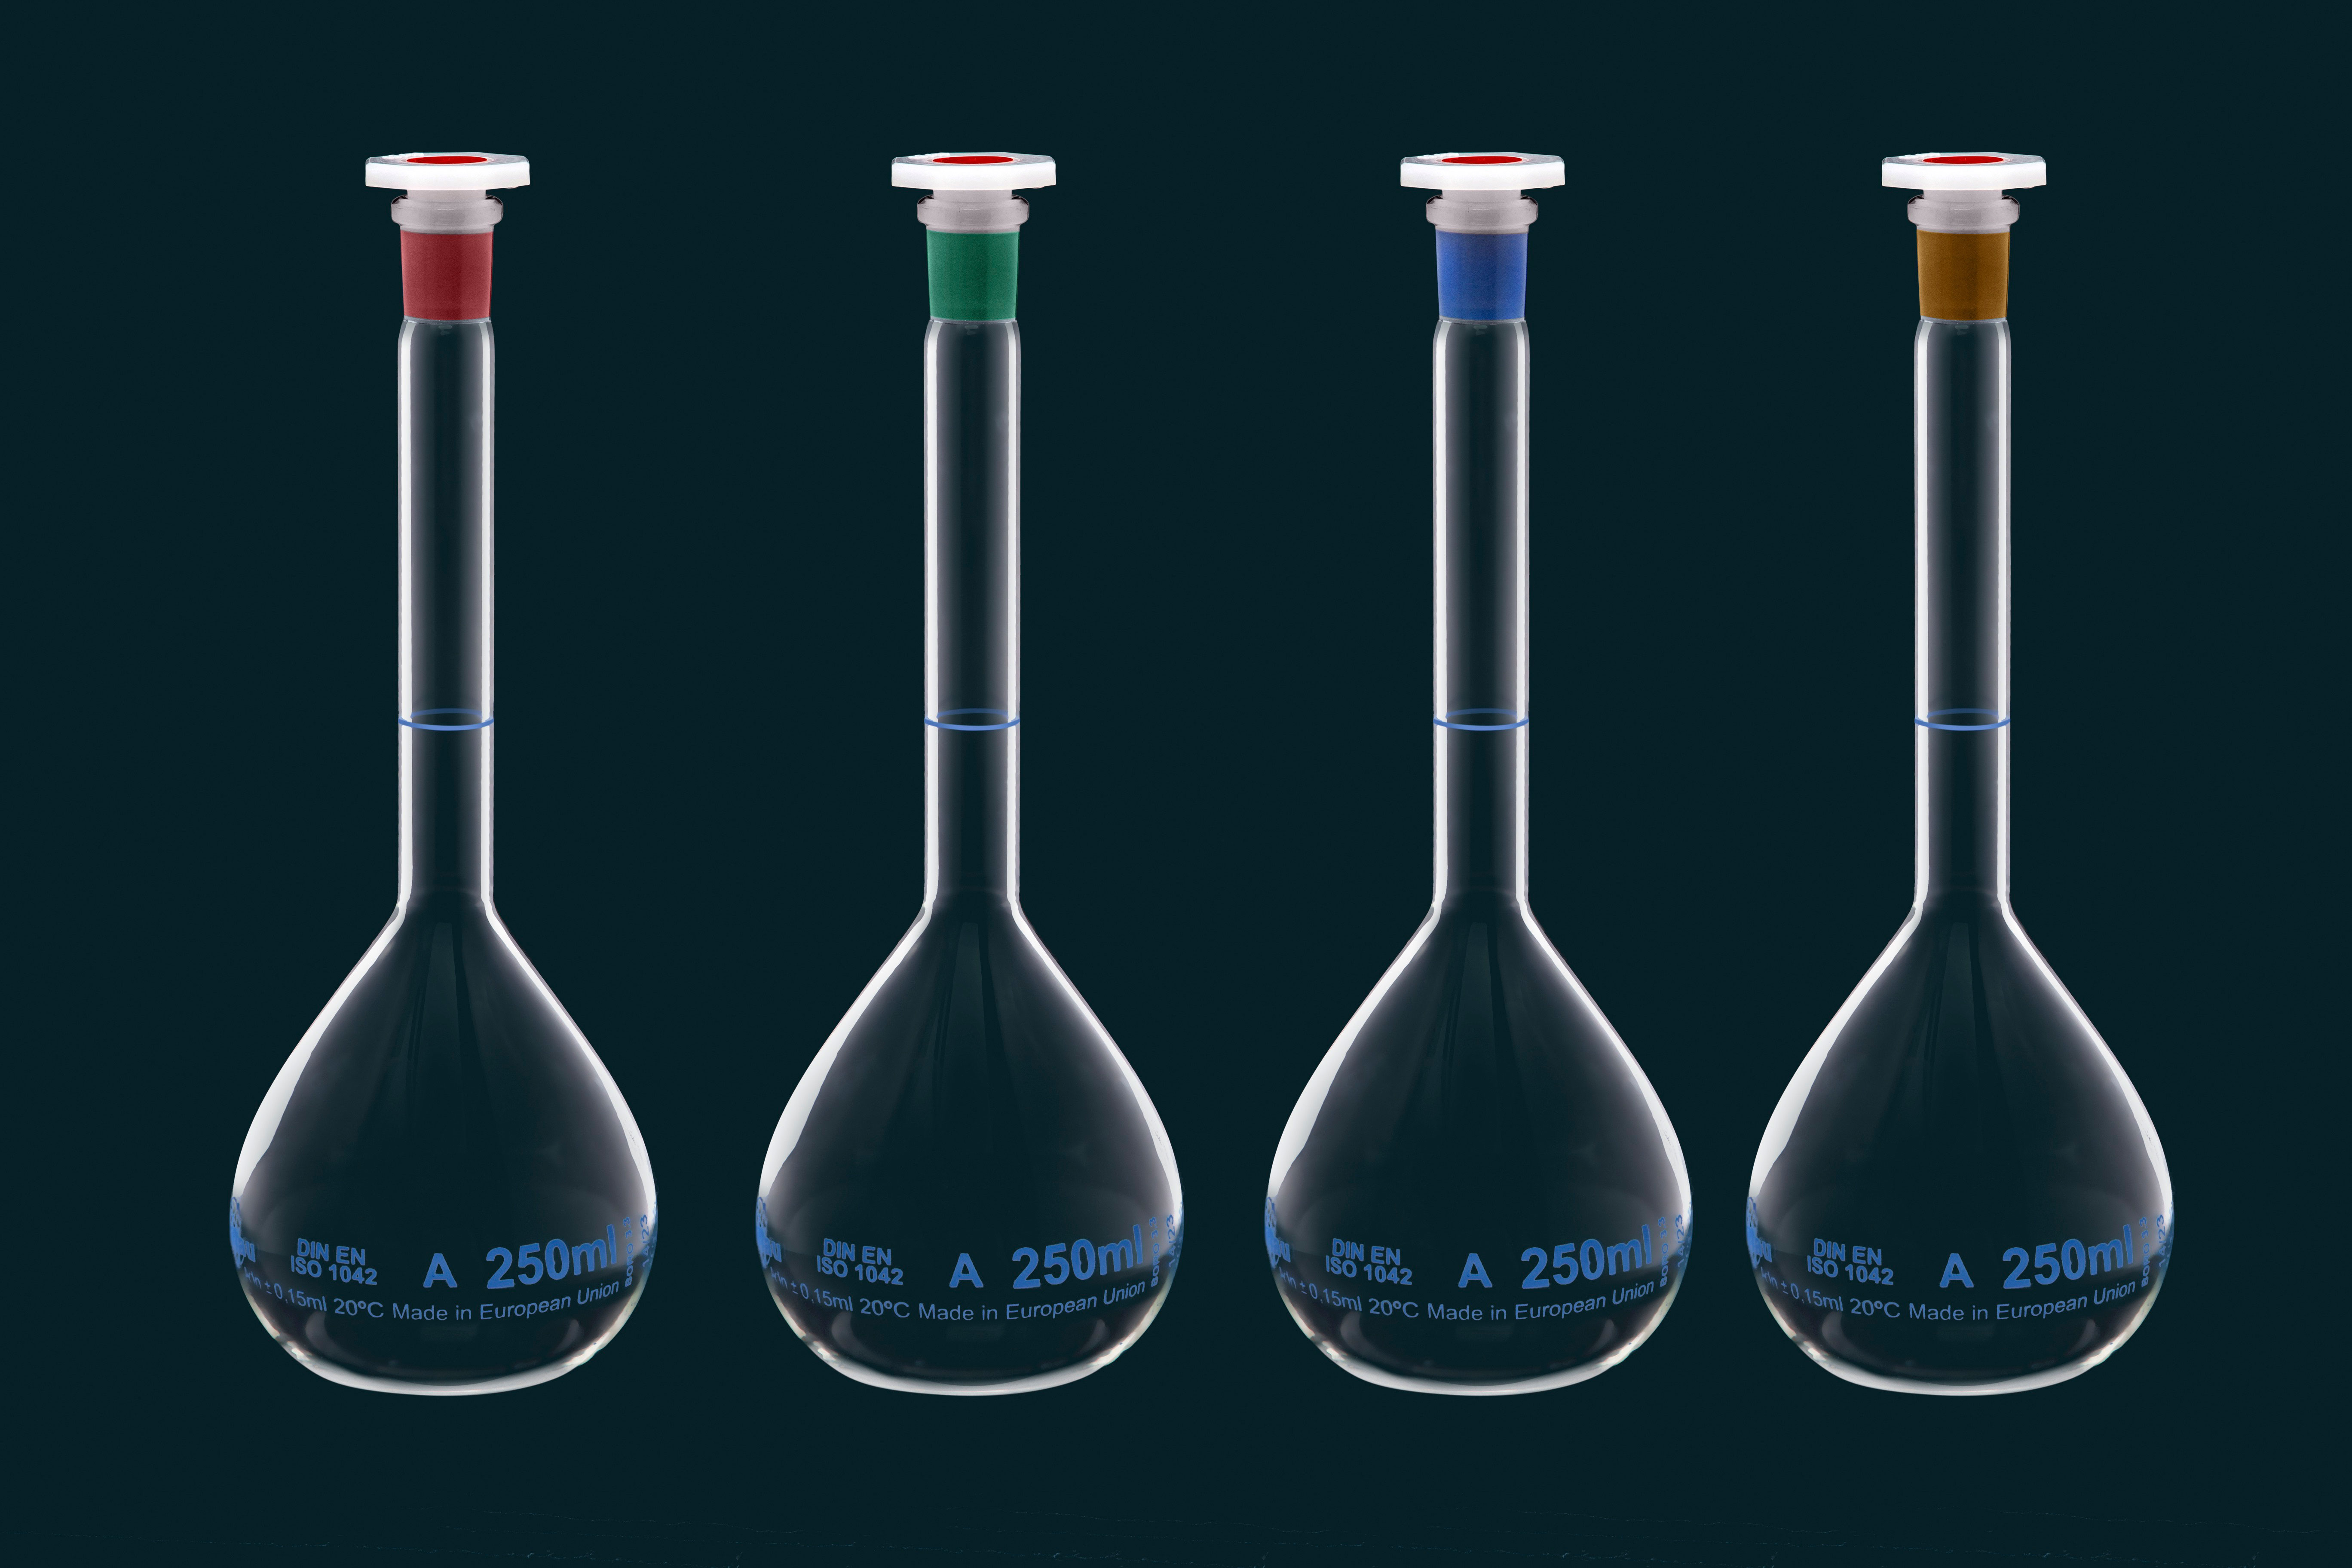 Volumetric flask with yellow neck, class A, 1000ml, with PE stopper, lot number and certificate of conformity